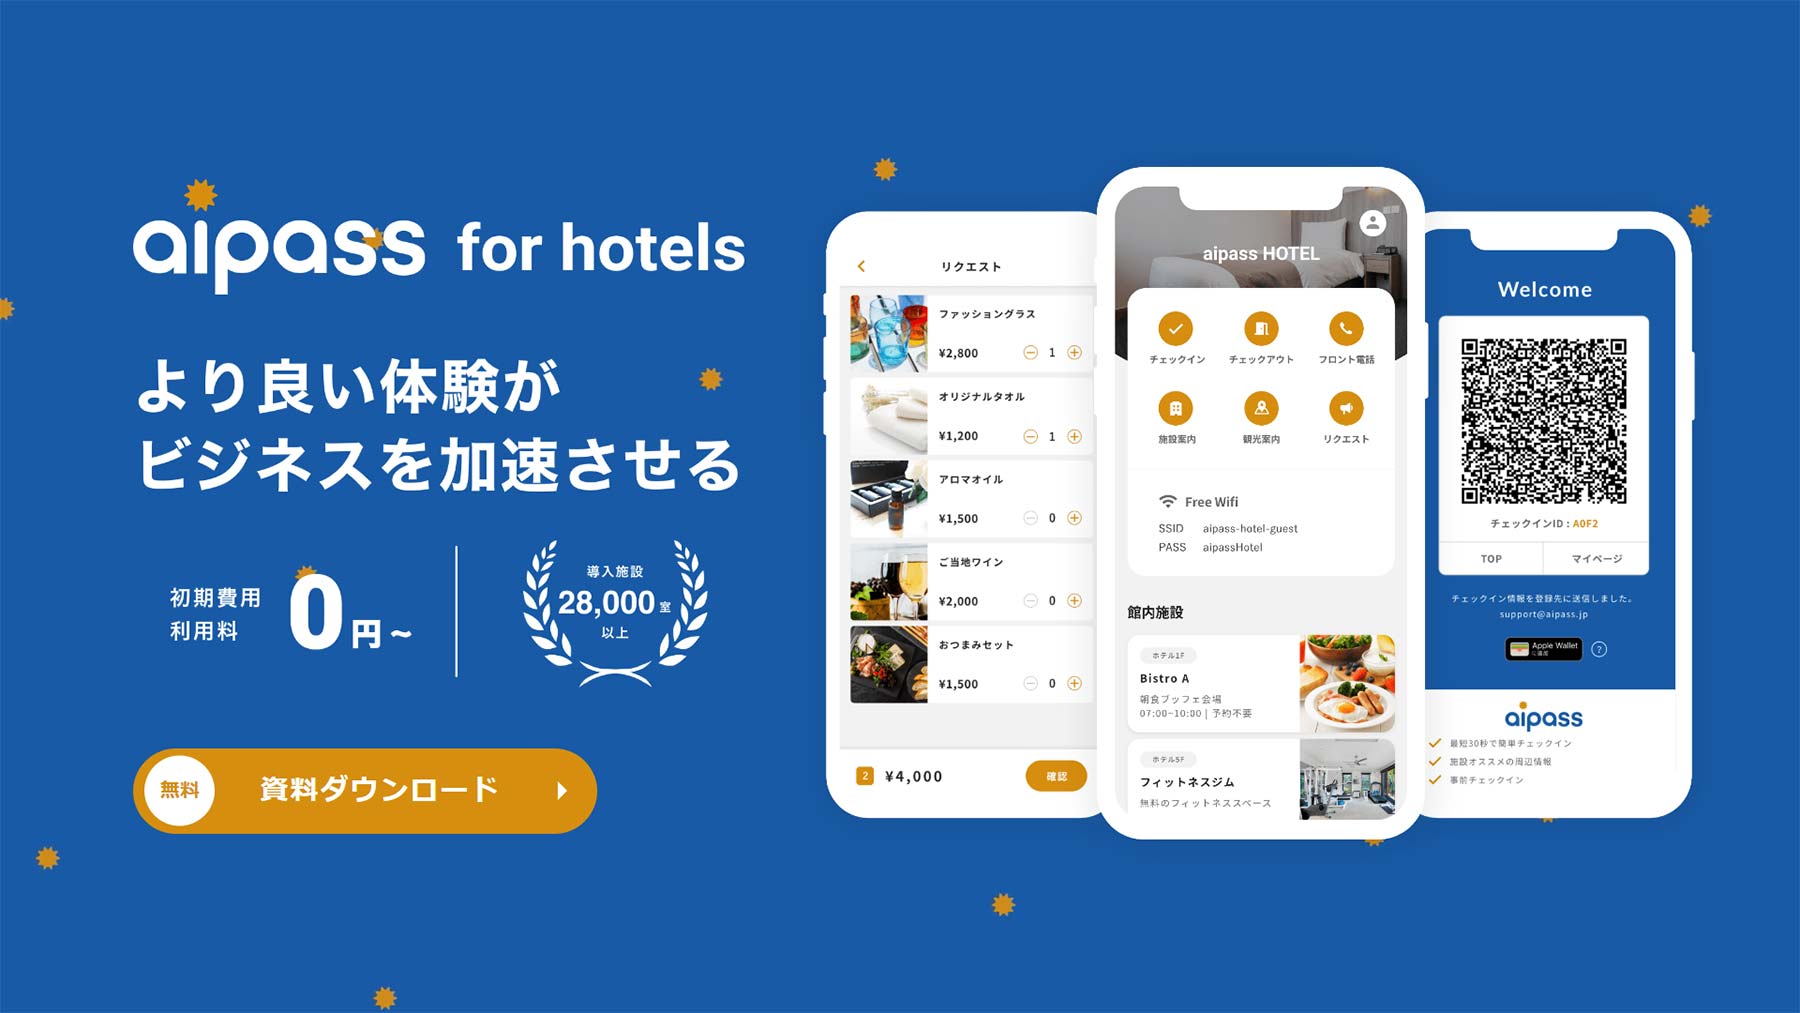 aipass for hotels公式Webサイト